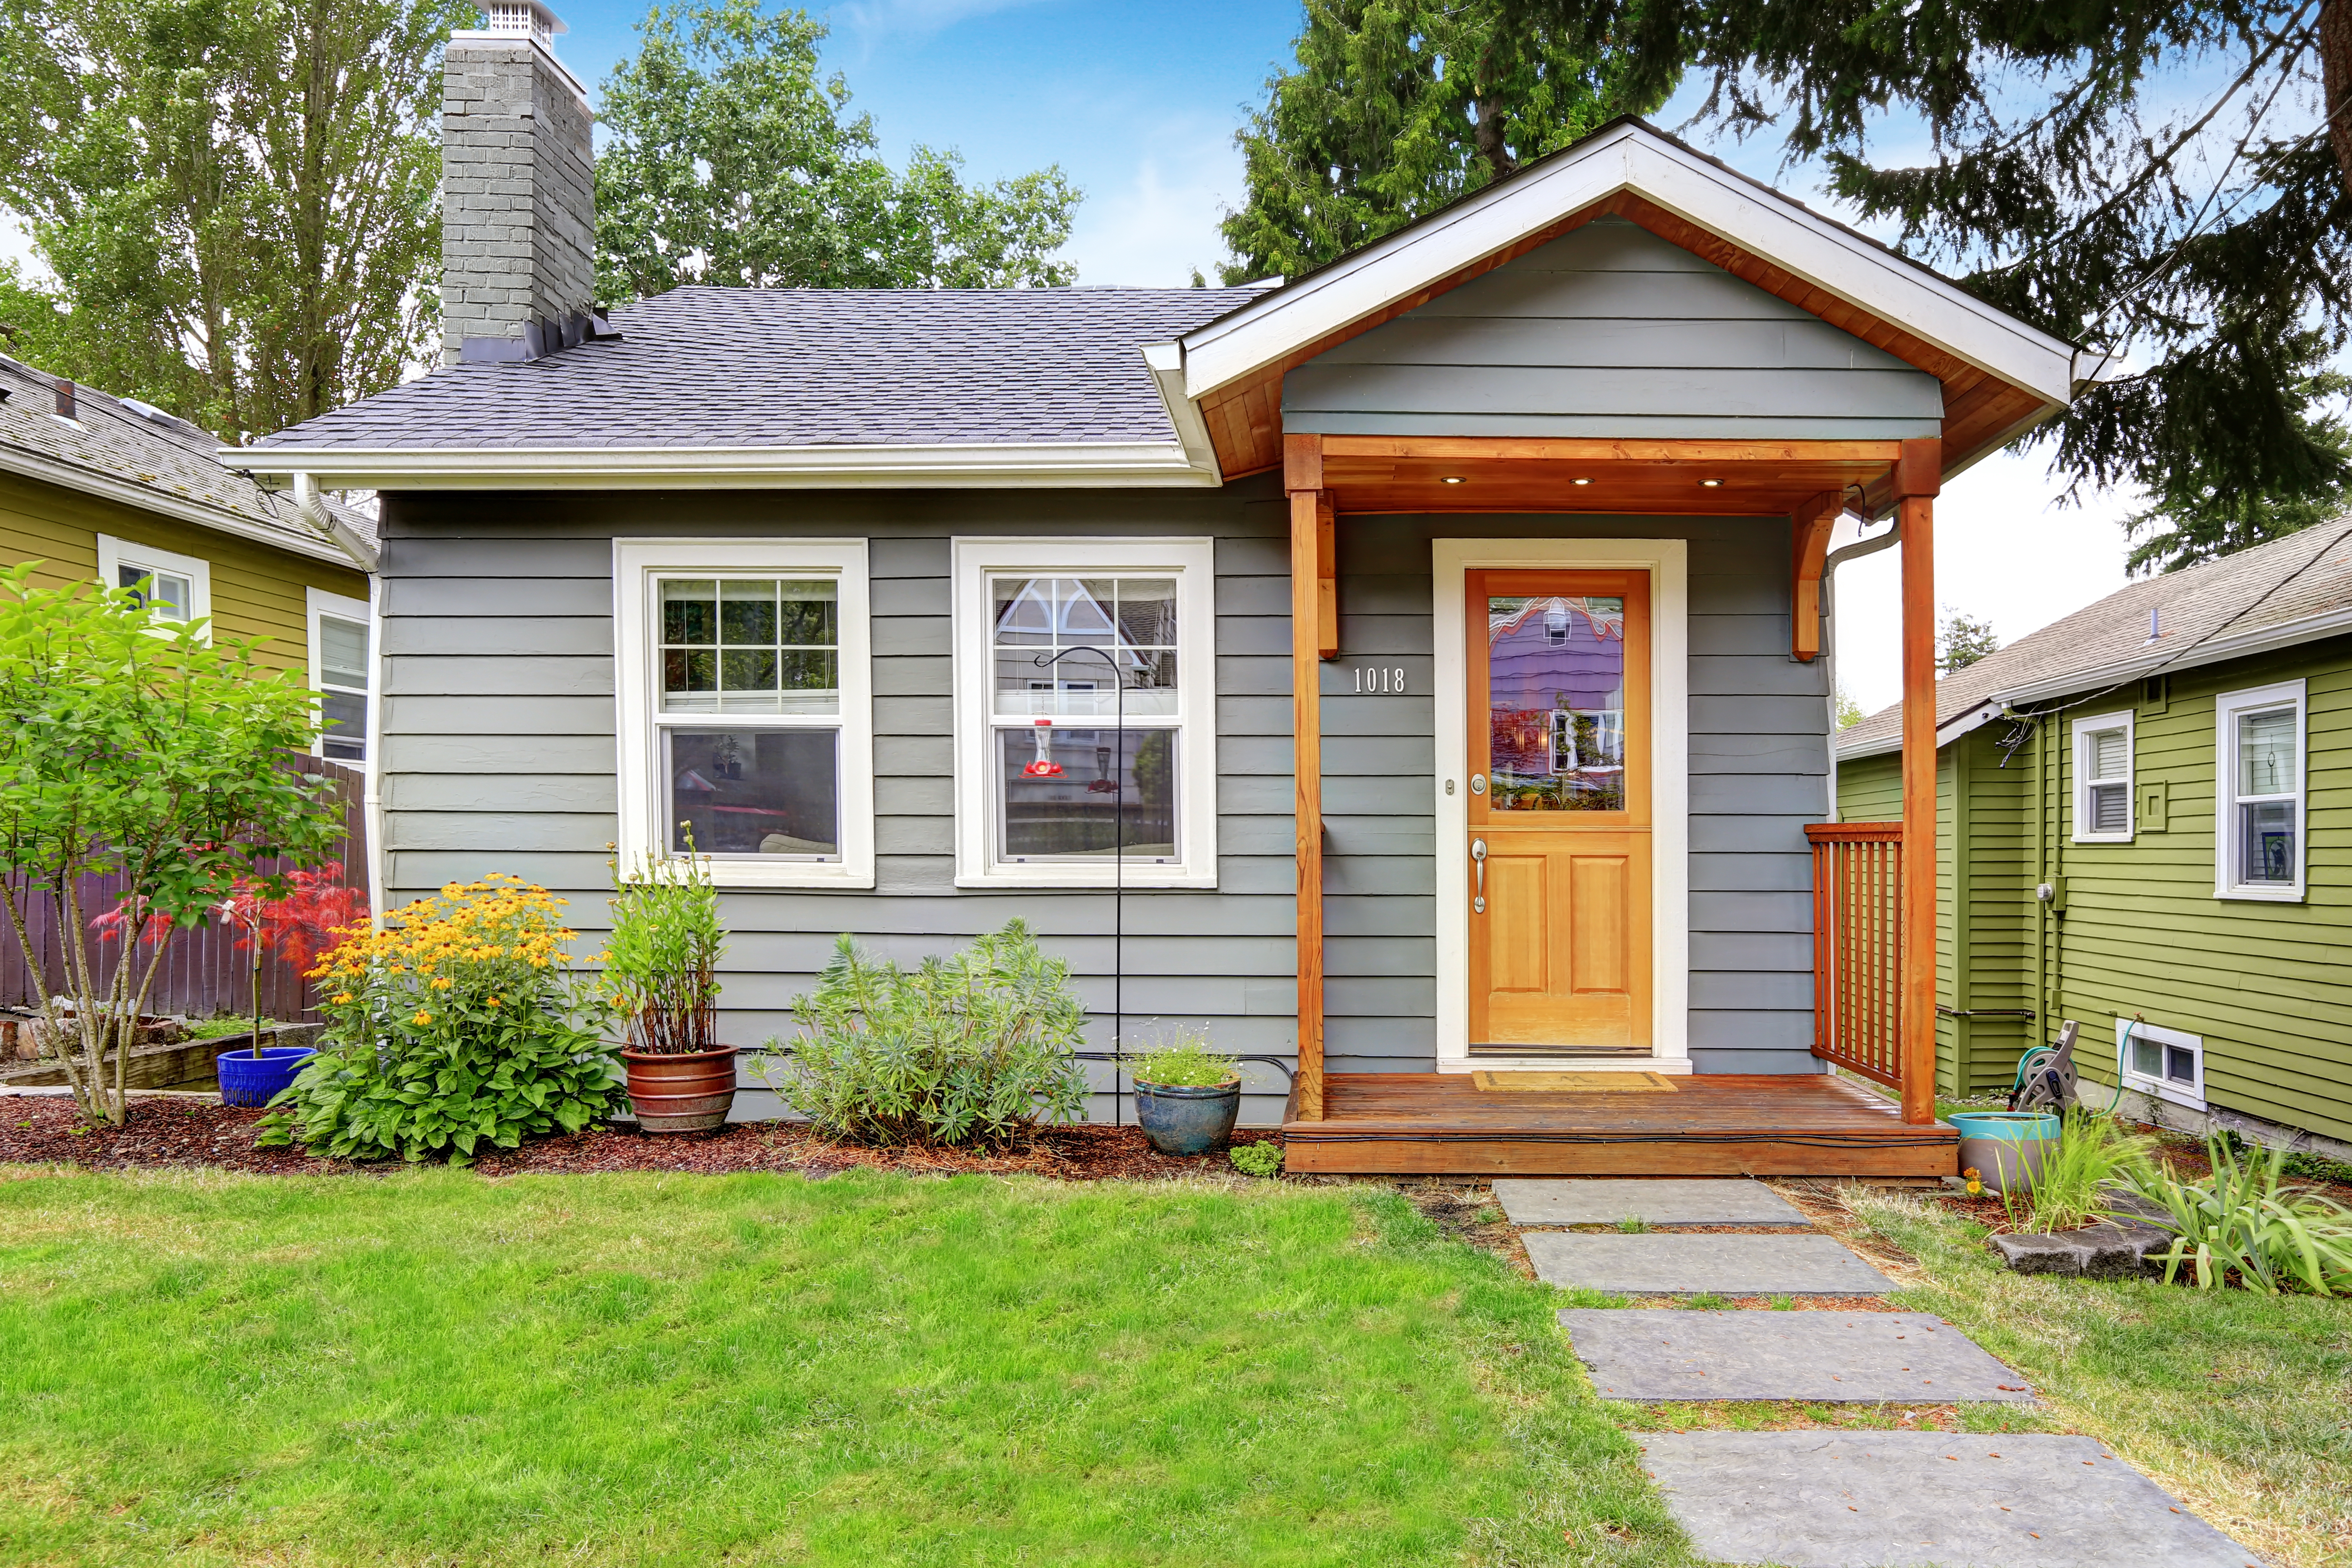 Small grey house with wooden deck. | Source: Shutterstock